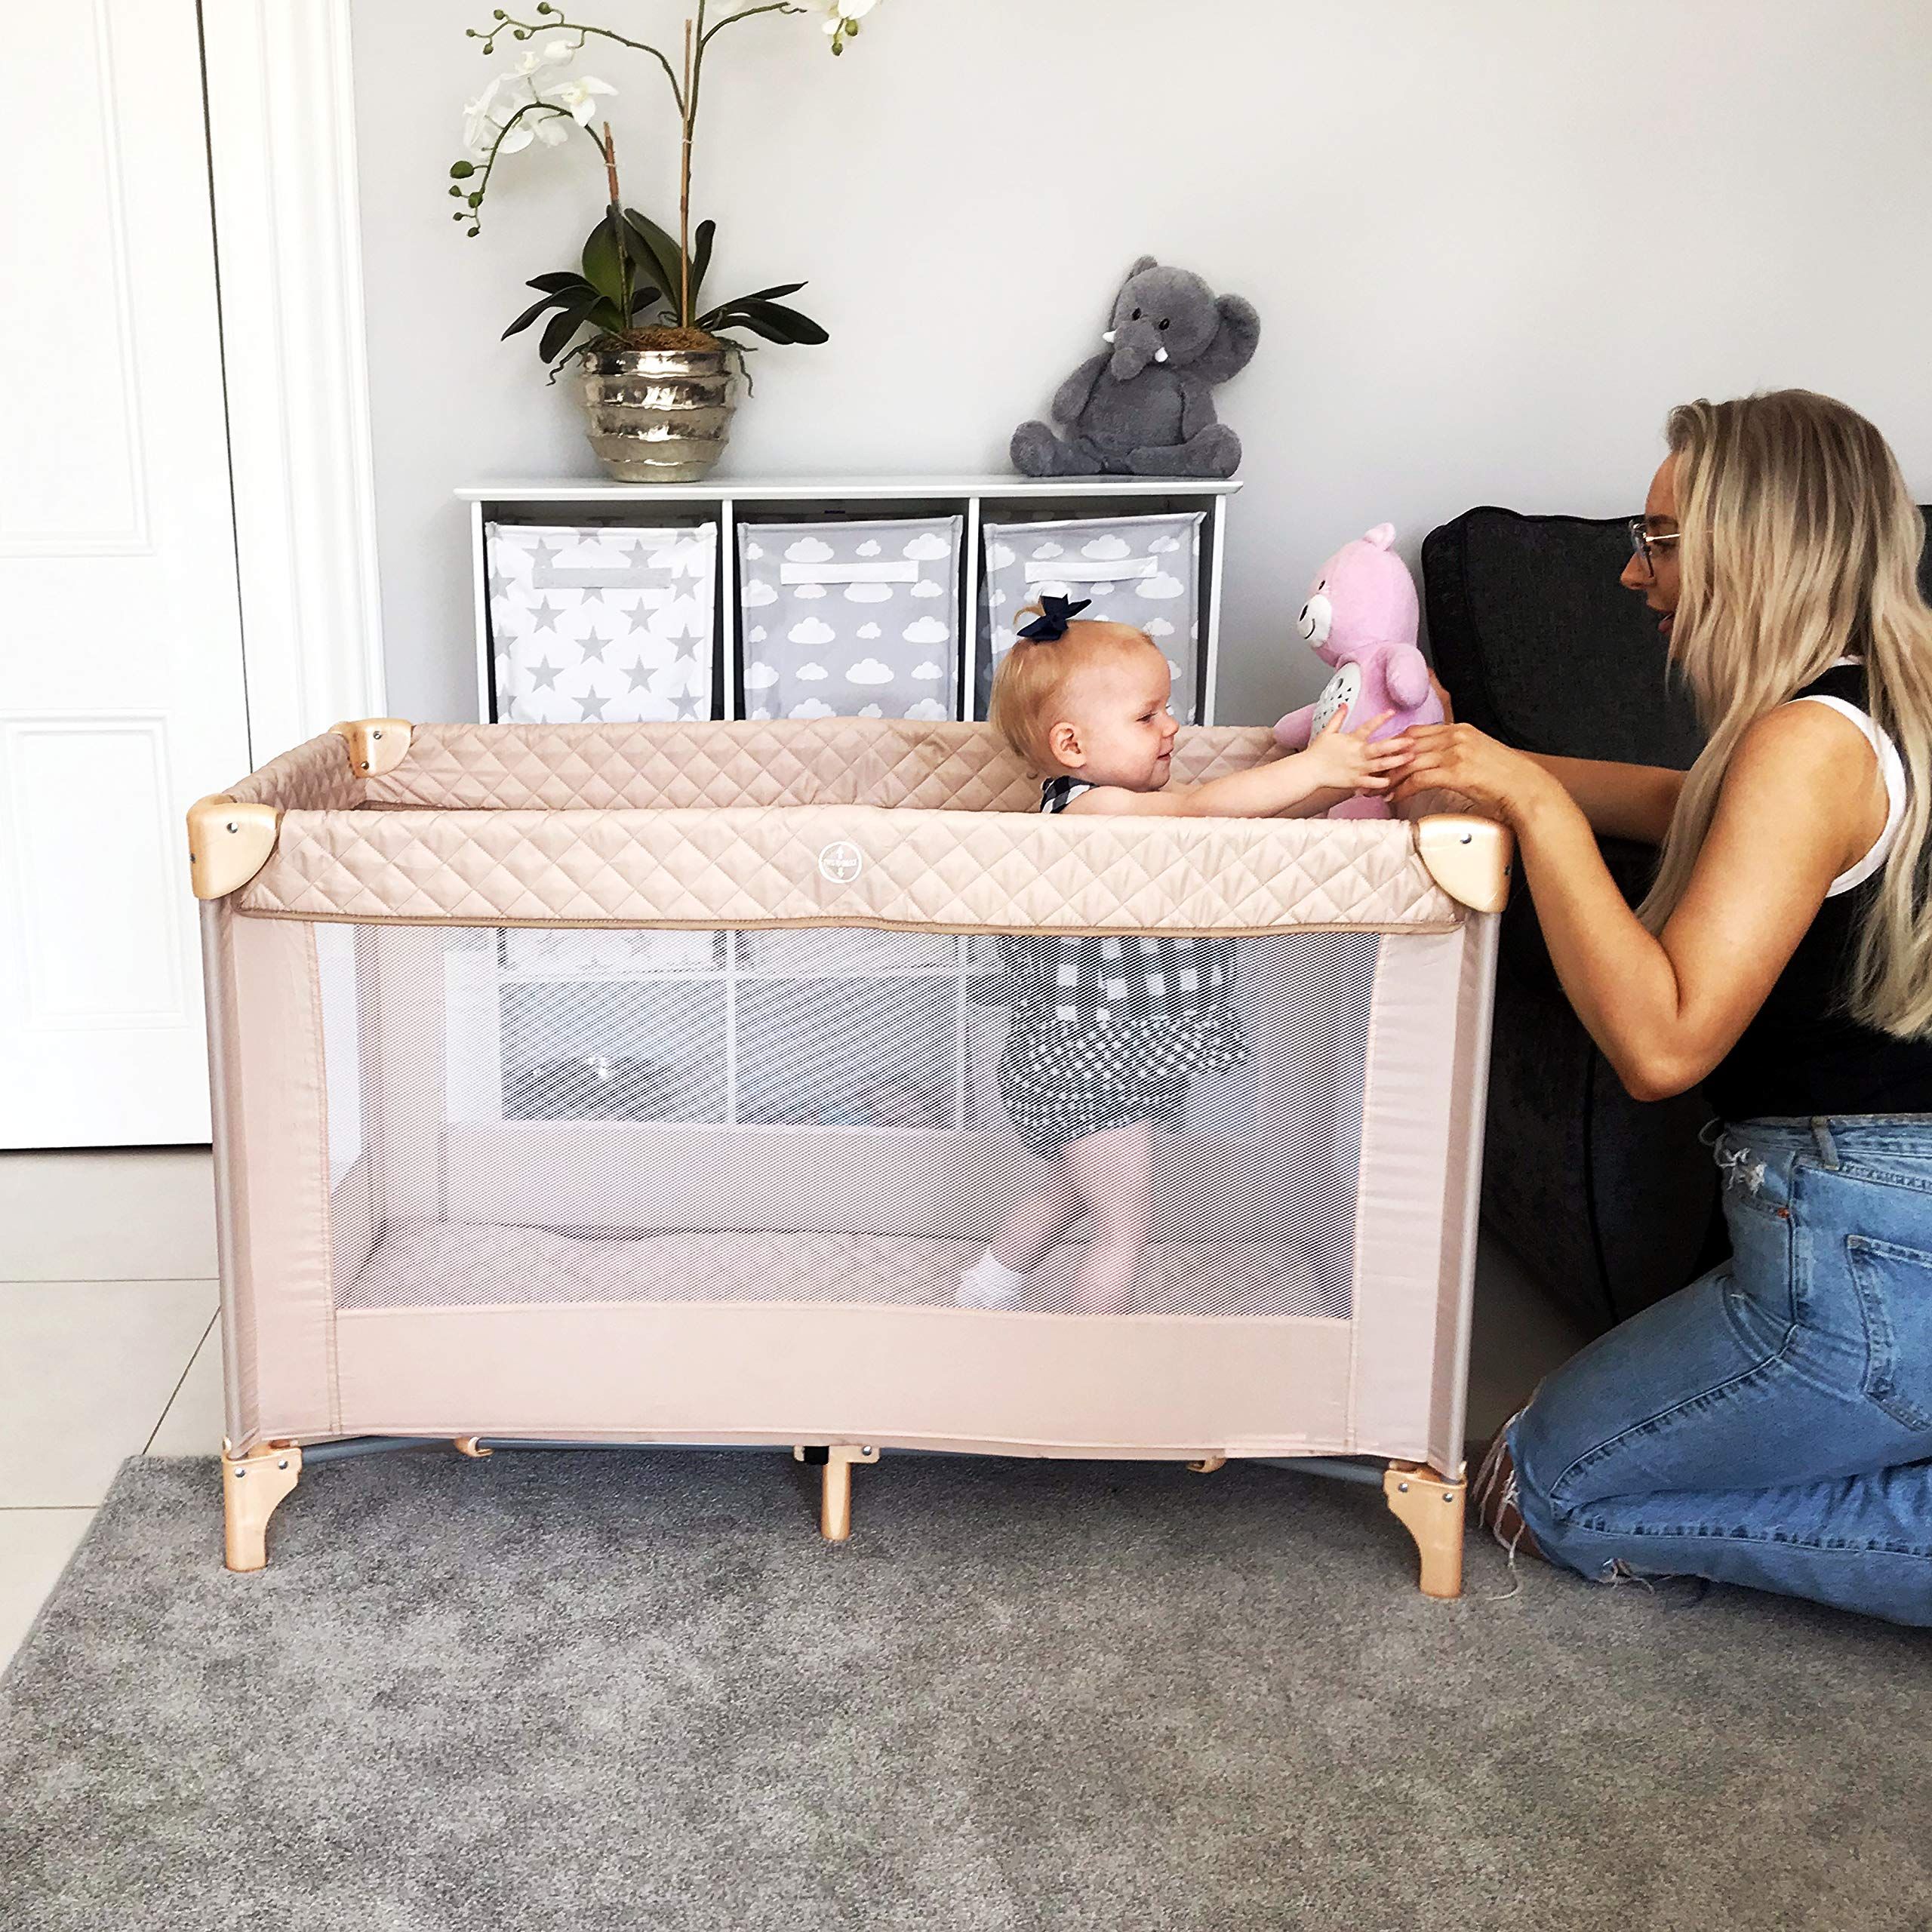 <p><strong>£59.99</strong></p><p><a href="https://www.amazon.co.uk/dp/B0852118JM">Shop Now</a></p><p>At under £60, this blush travel cot from on-trend baby brand <a href="https://mybabiie.com/">My Babiie</a> is a great budget-friendly neutral option. It’s easy to assemble and doubles up as a playpen making it the ideal travel companion. This stylish travel cot also comes with a handy carry bag and padded bumper rails, plus it’s suitable for babies from birth up to a weight of 15kg. </p>